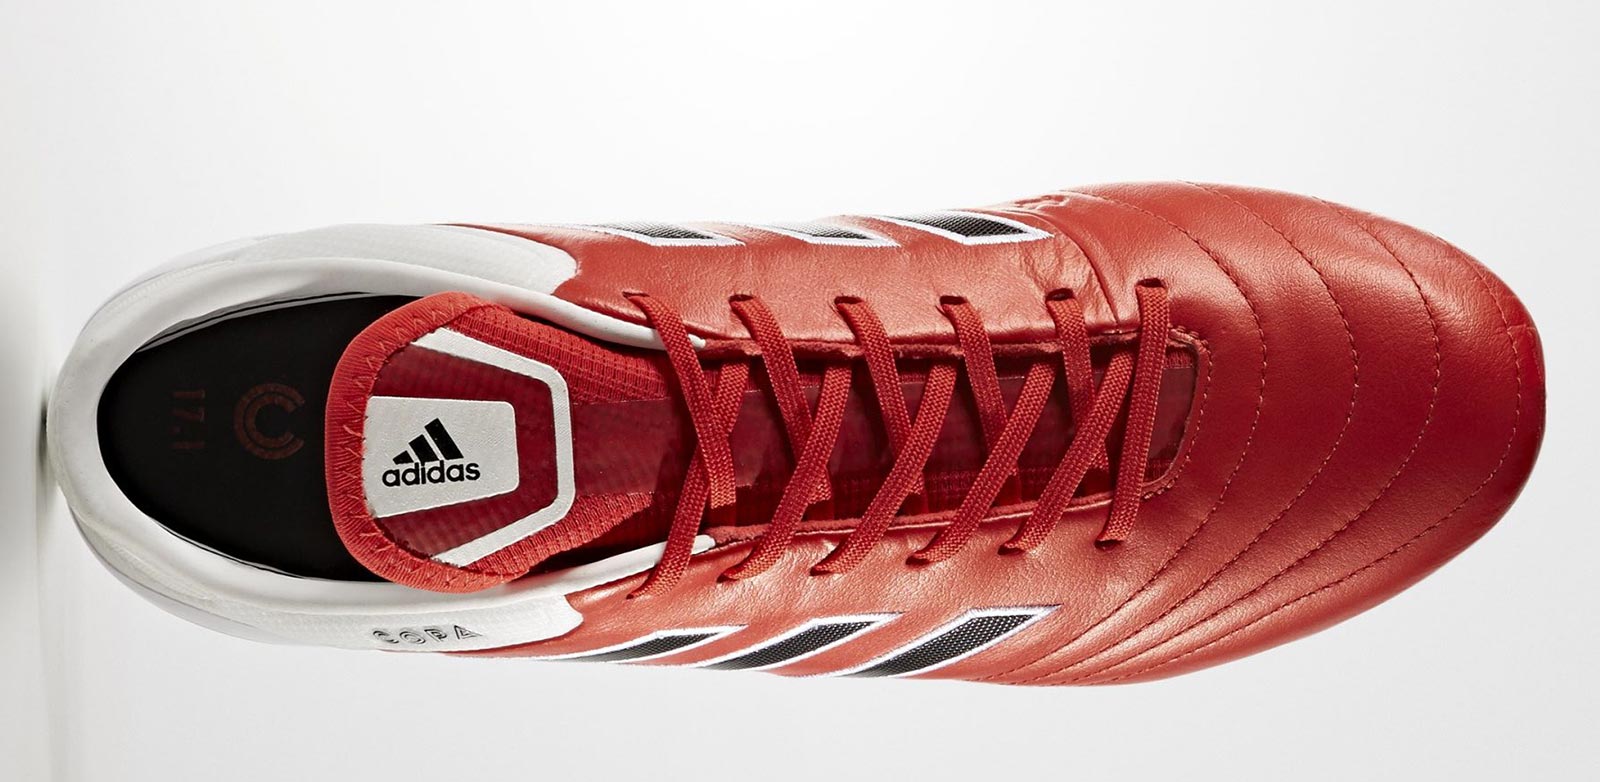 adidas-copa-17-1-red-limit-overhead